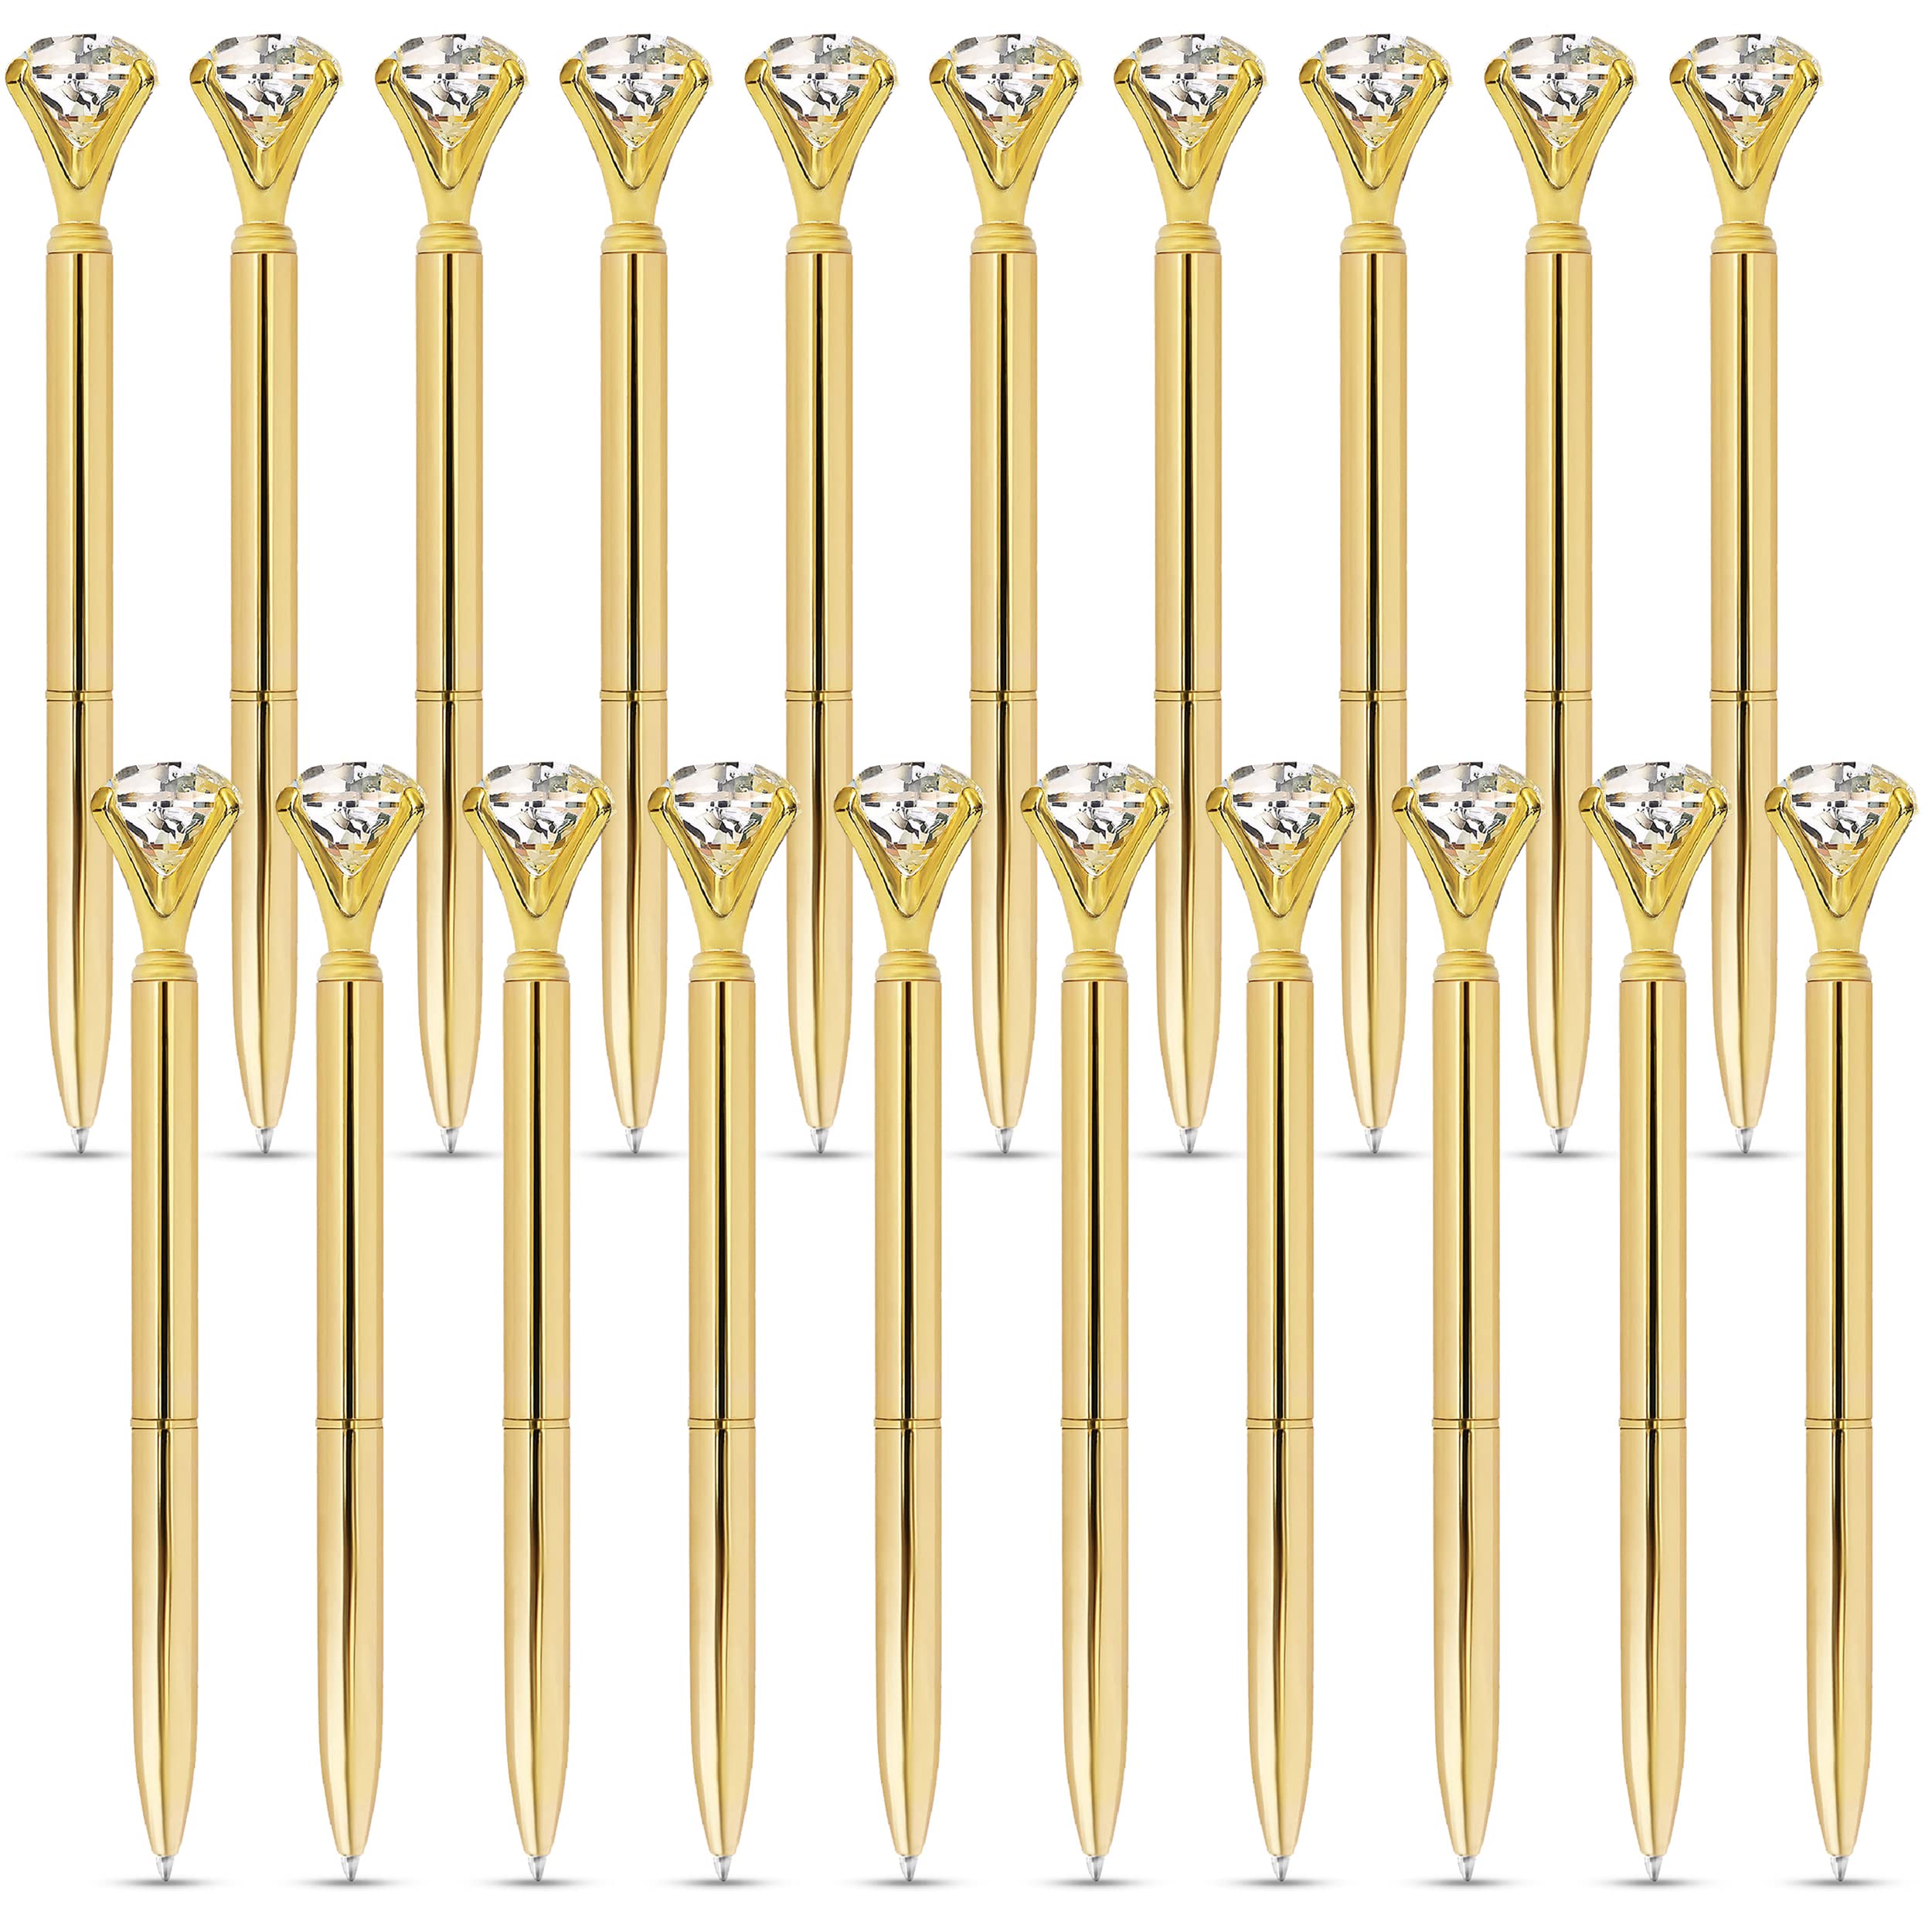 ETCBUYS Multi-Color Diamond Ballpoint Pen for Stylish Fancy Office Supplies- 20-all-gold-color-pens